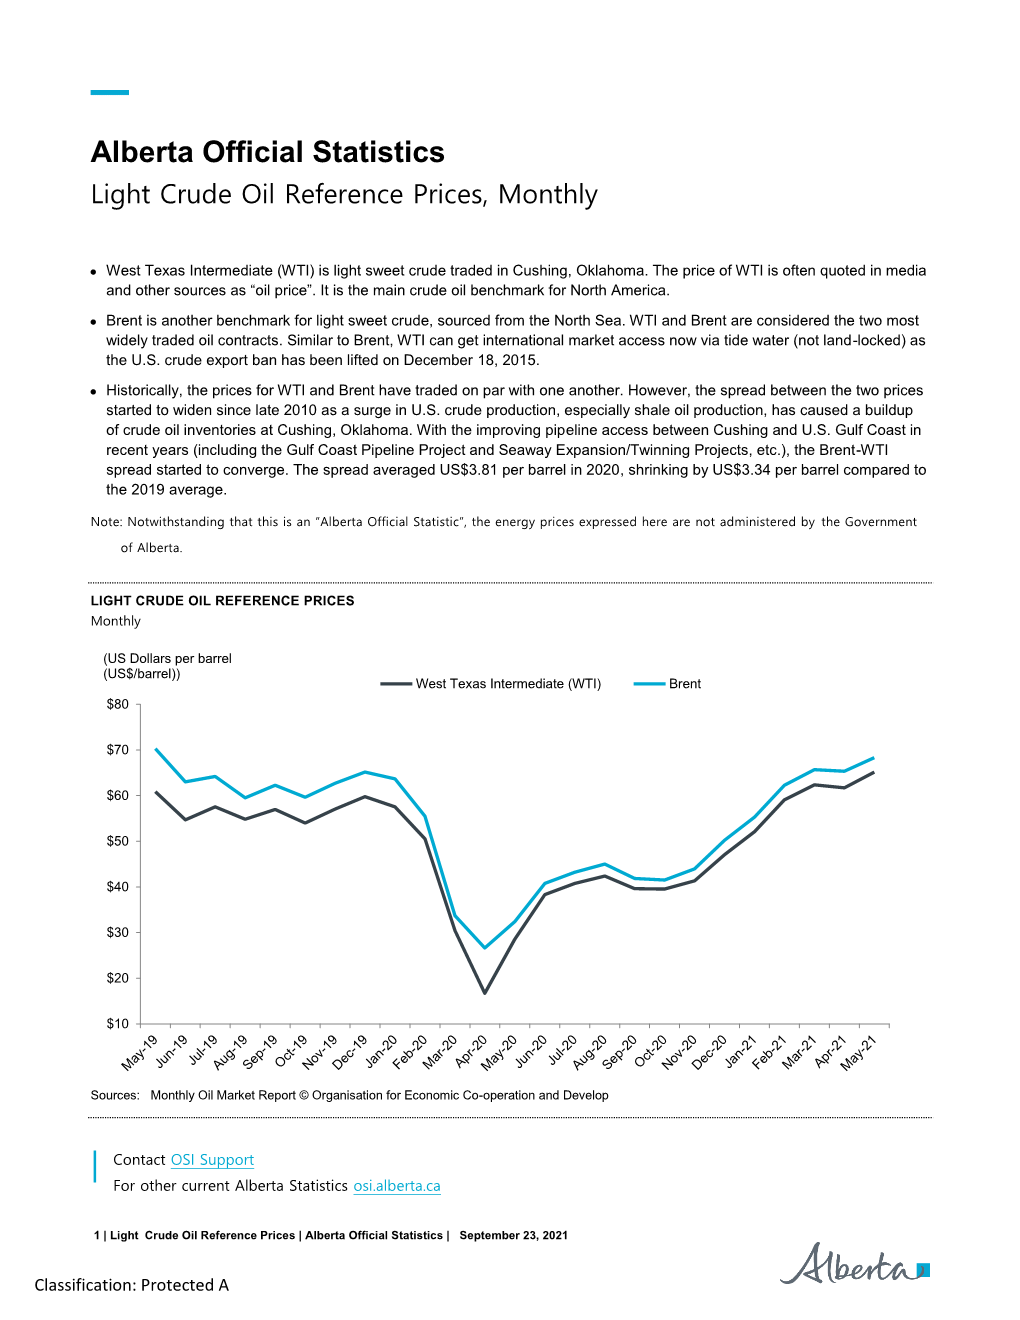 Light Crude Oil Reference Prices, Monthly